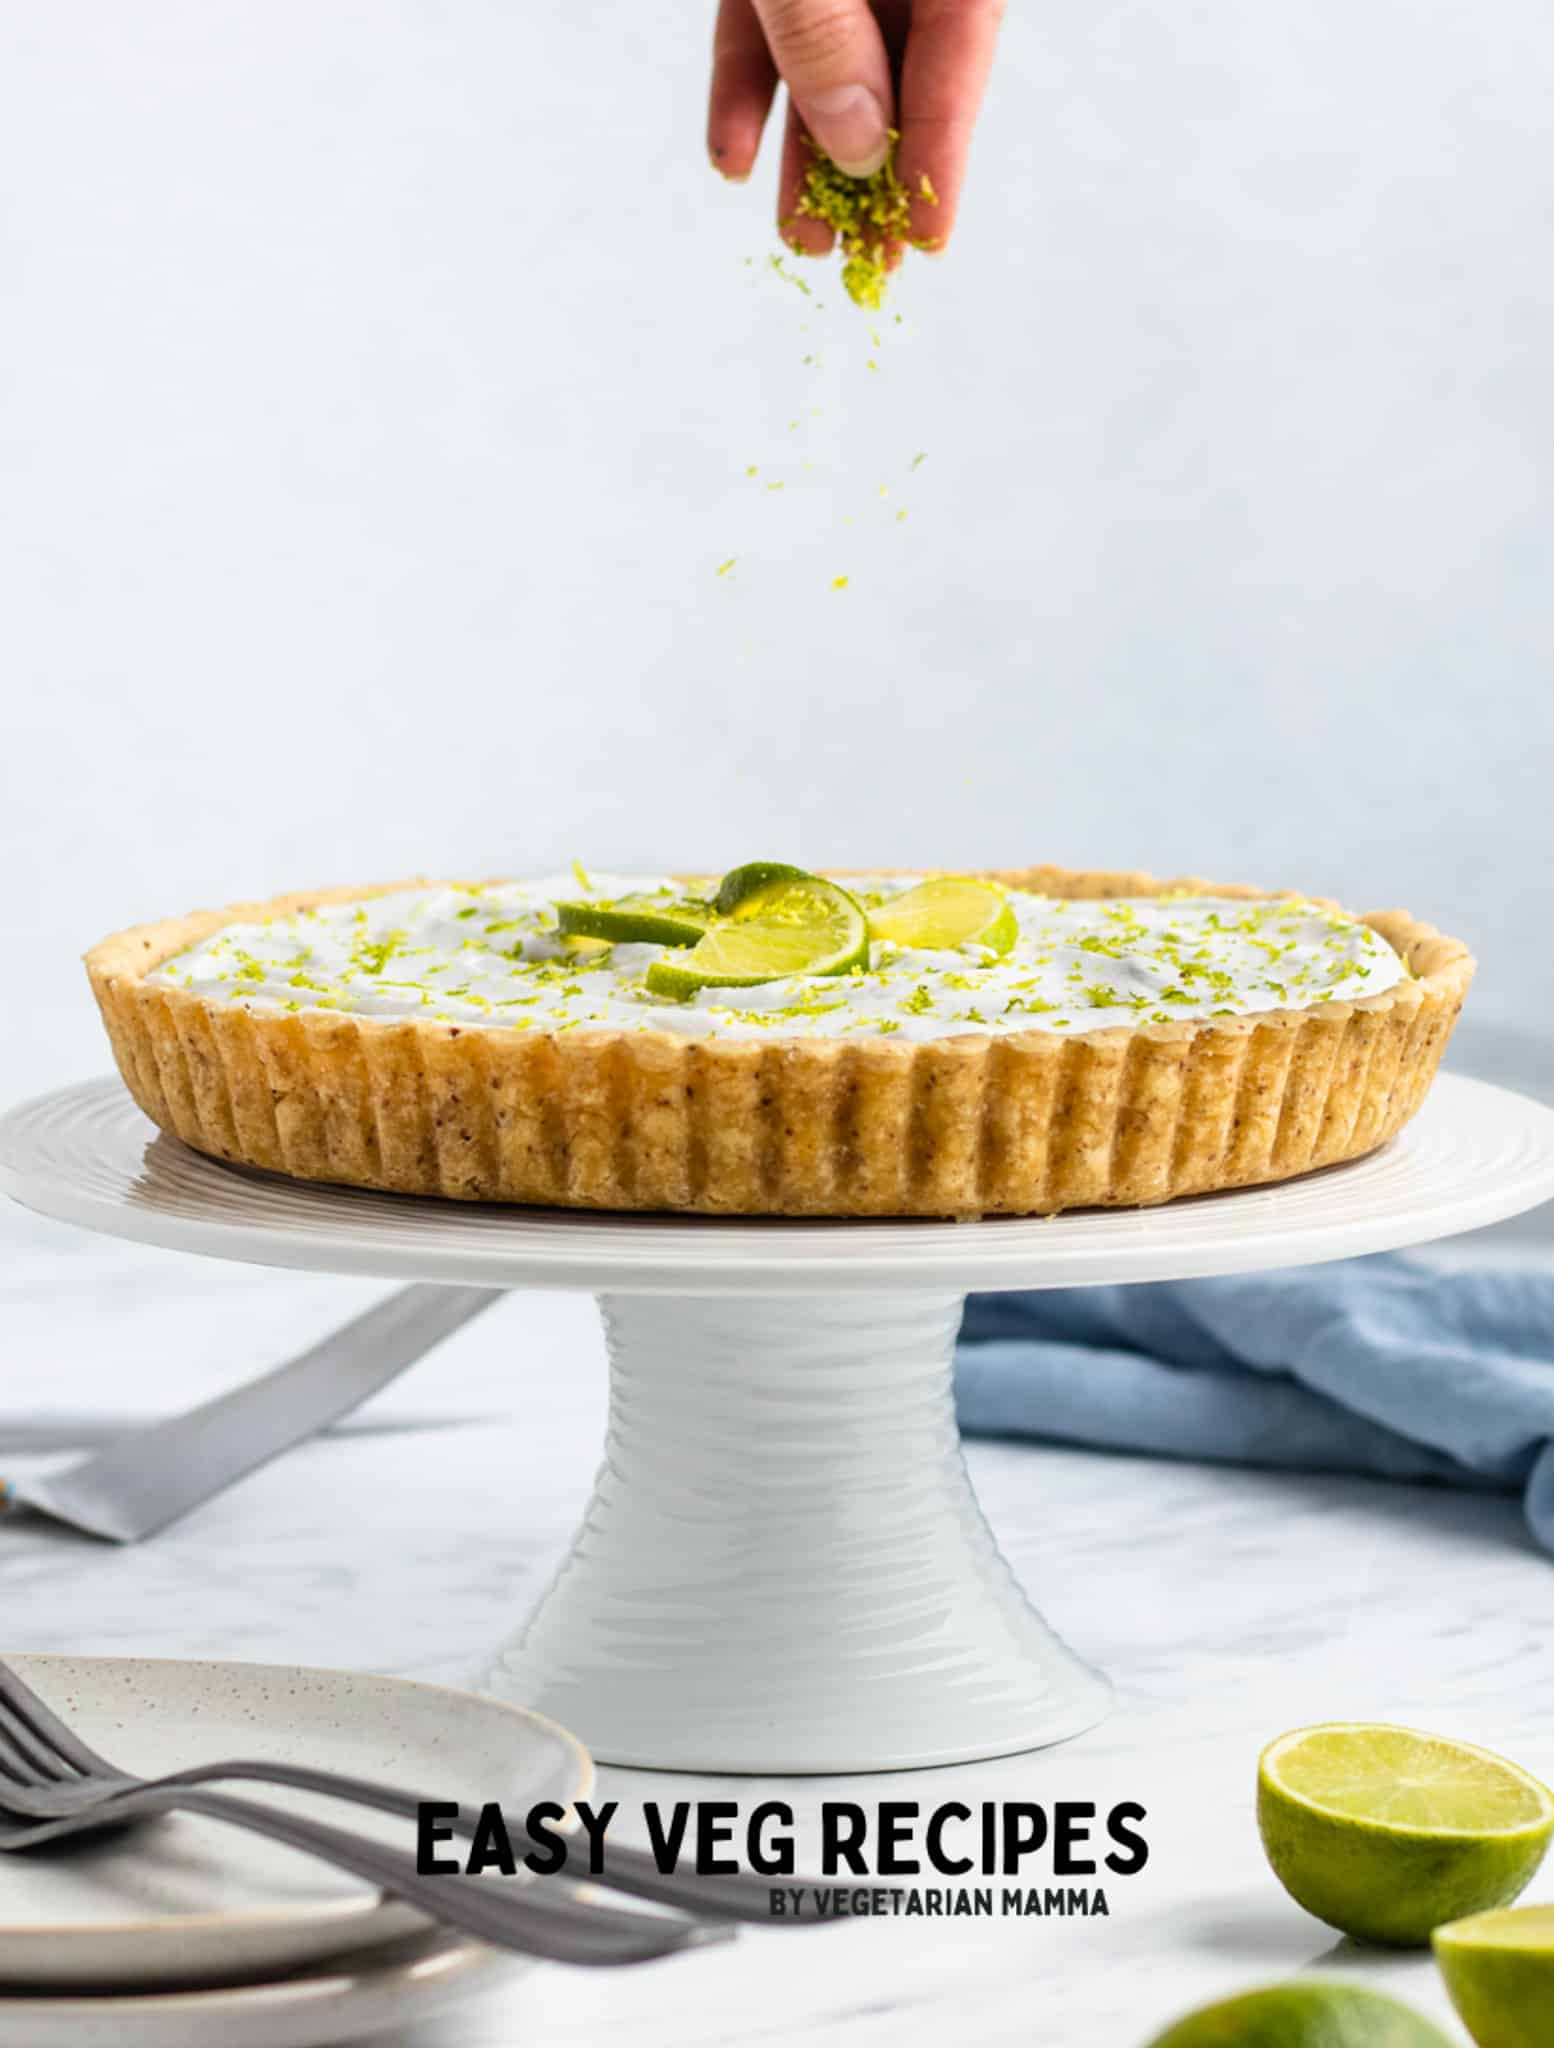 A key lime pie on a white cake pedestal. A hand is sprinkling something over it.